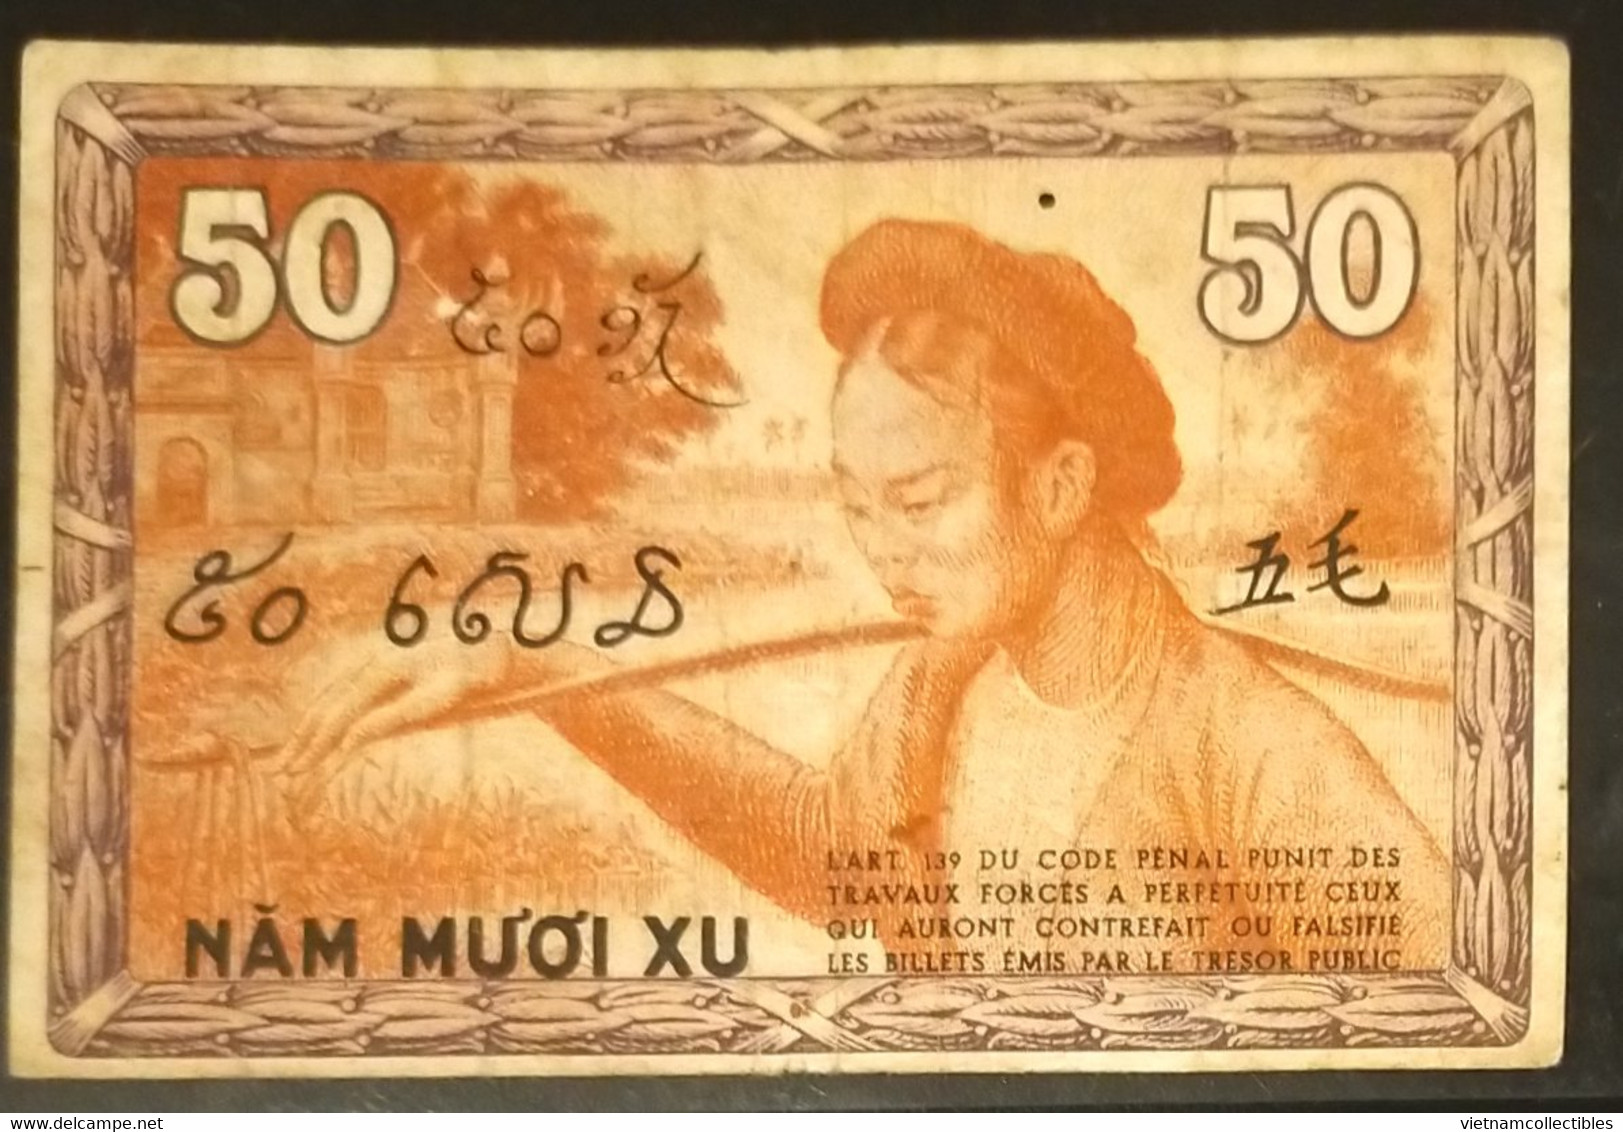 French Indochine Indochina Vietnam Viet Nam Laos Cambodia 50 Cents VF Banknote Note 1939 - Pick # 87e / 2 Photos - Indochine